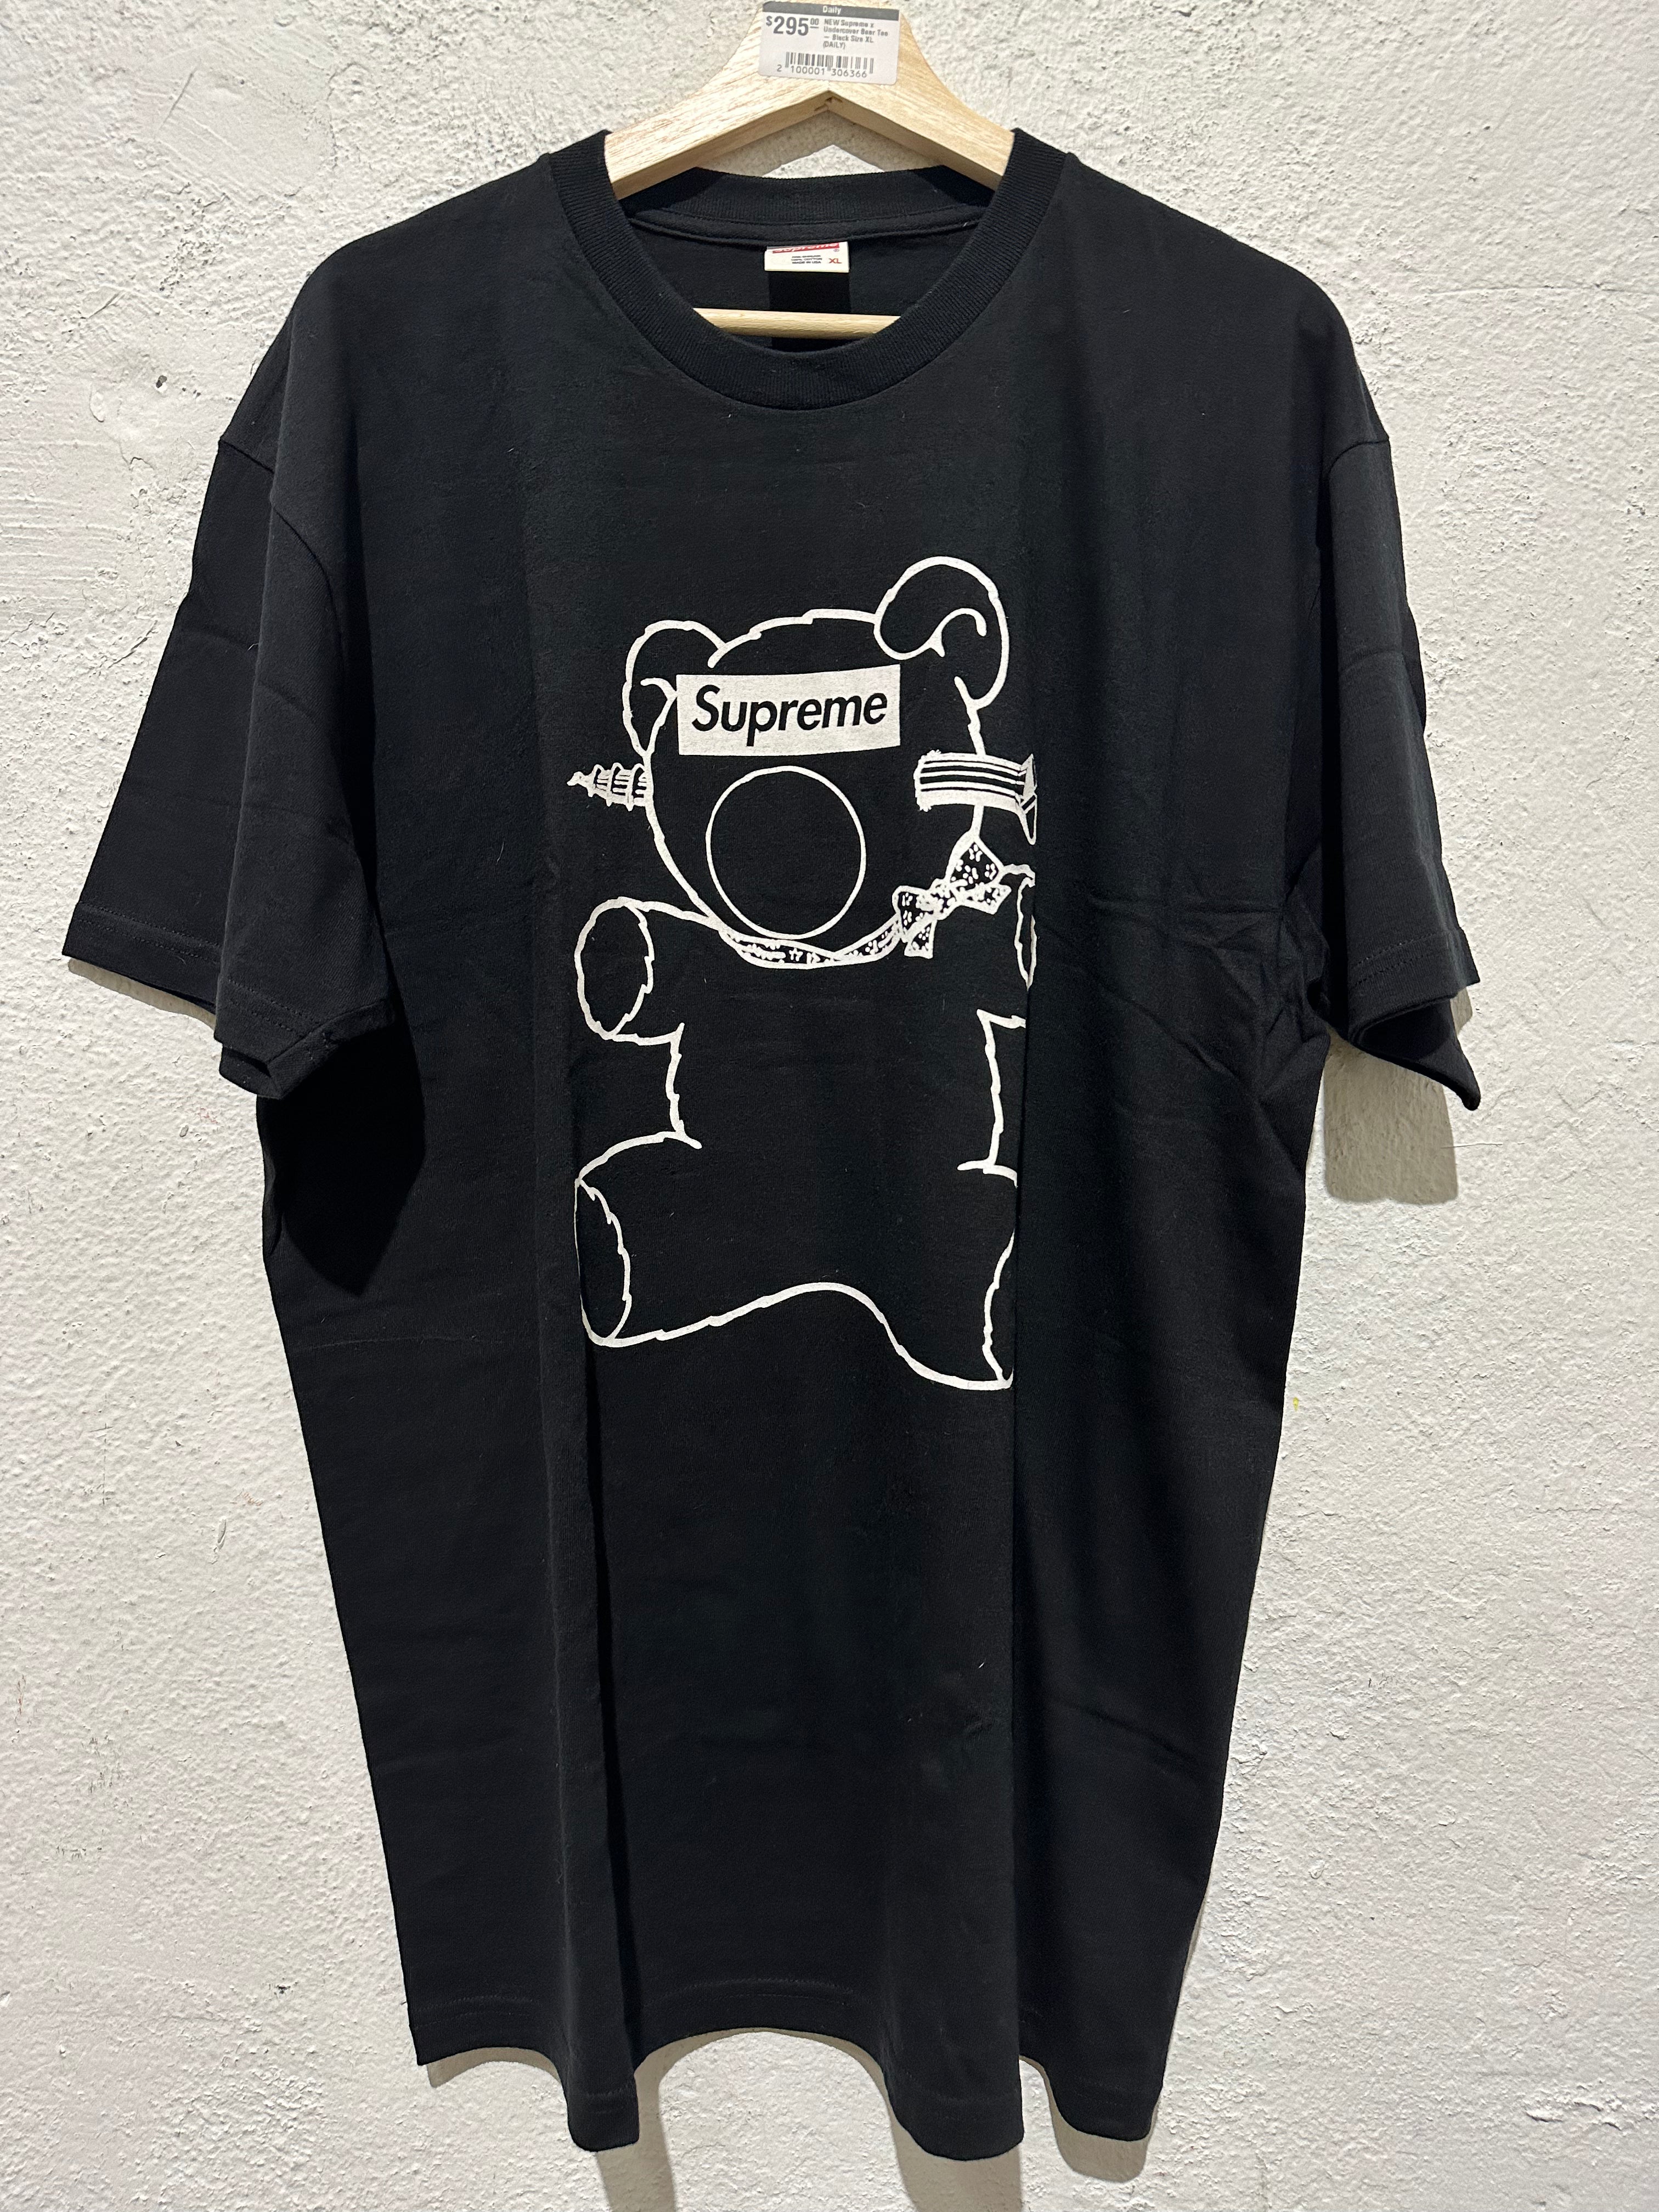 NEW Supreme x Undercover Bear Tee - Black Size XL